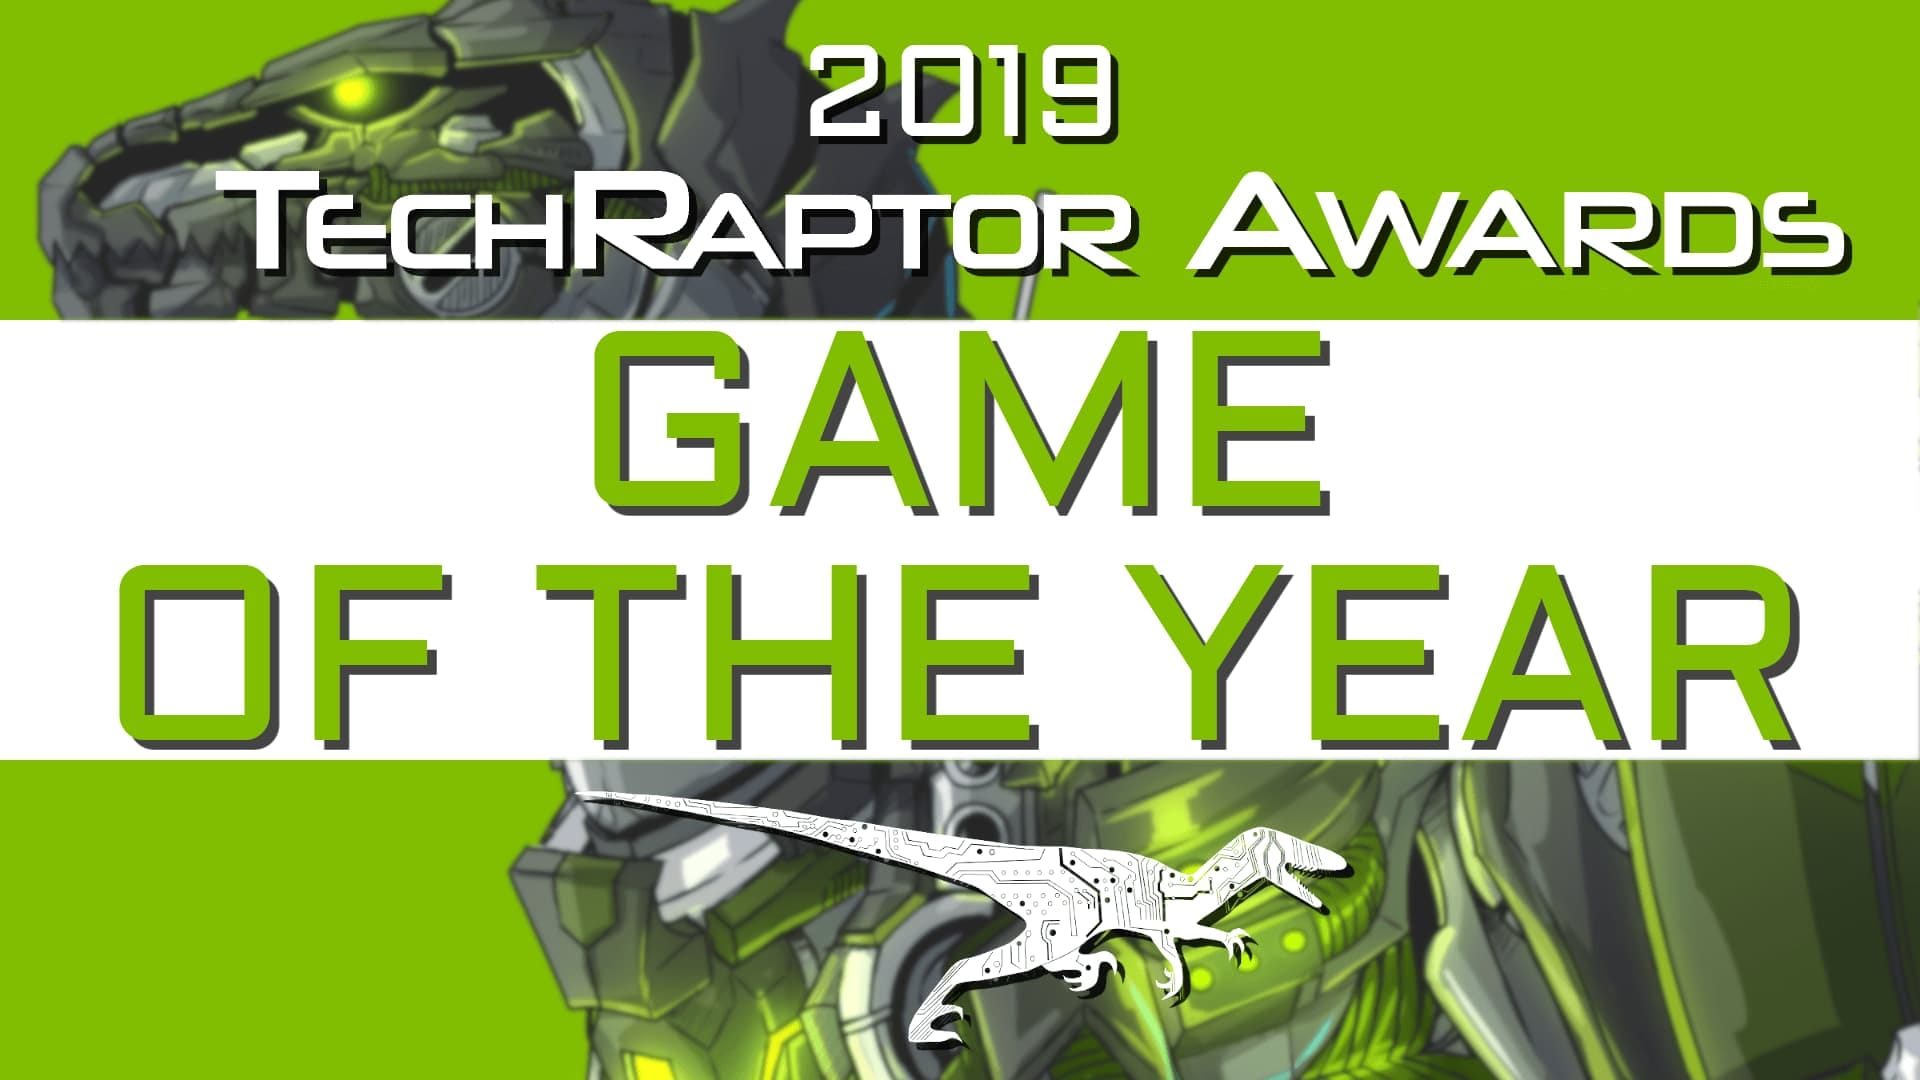 eXplorminate's Game of the Year 2019 - eXplorminate